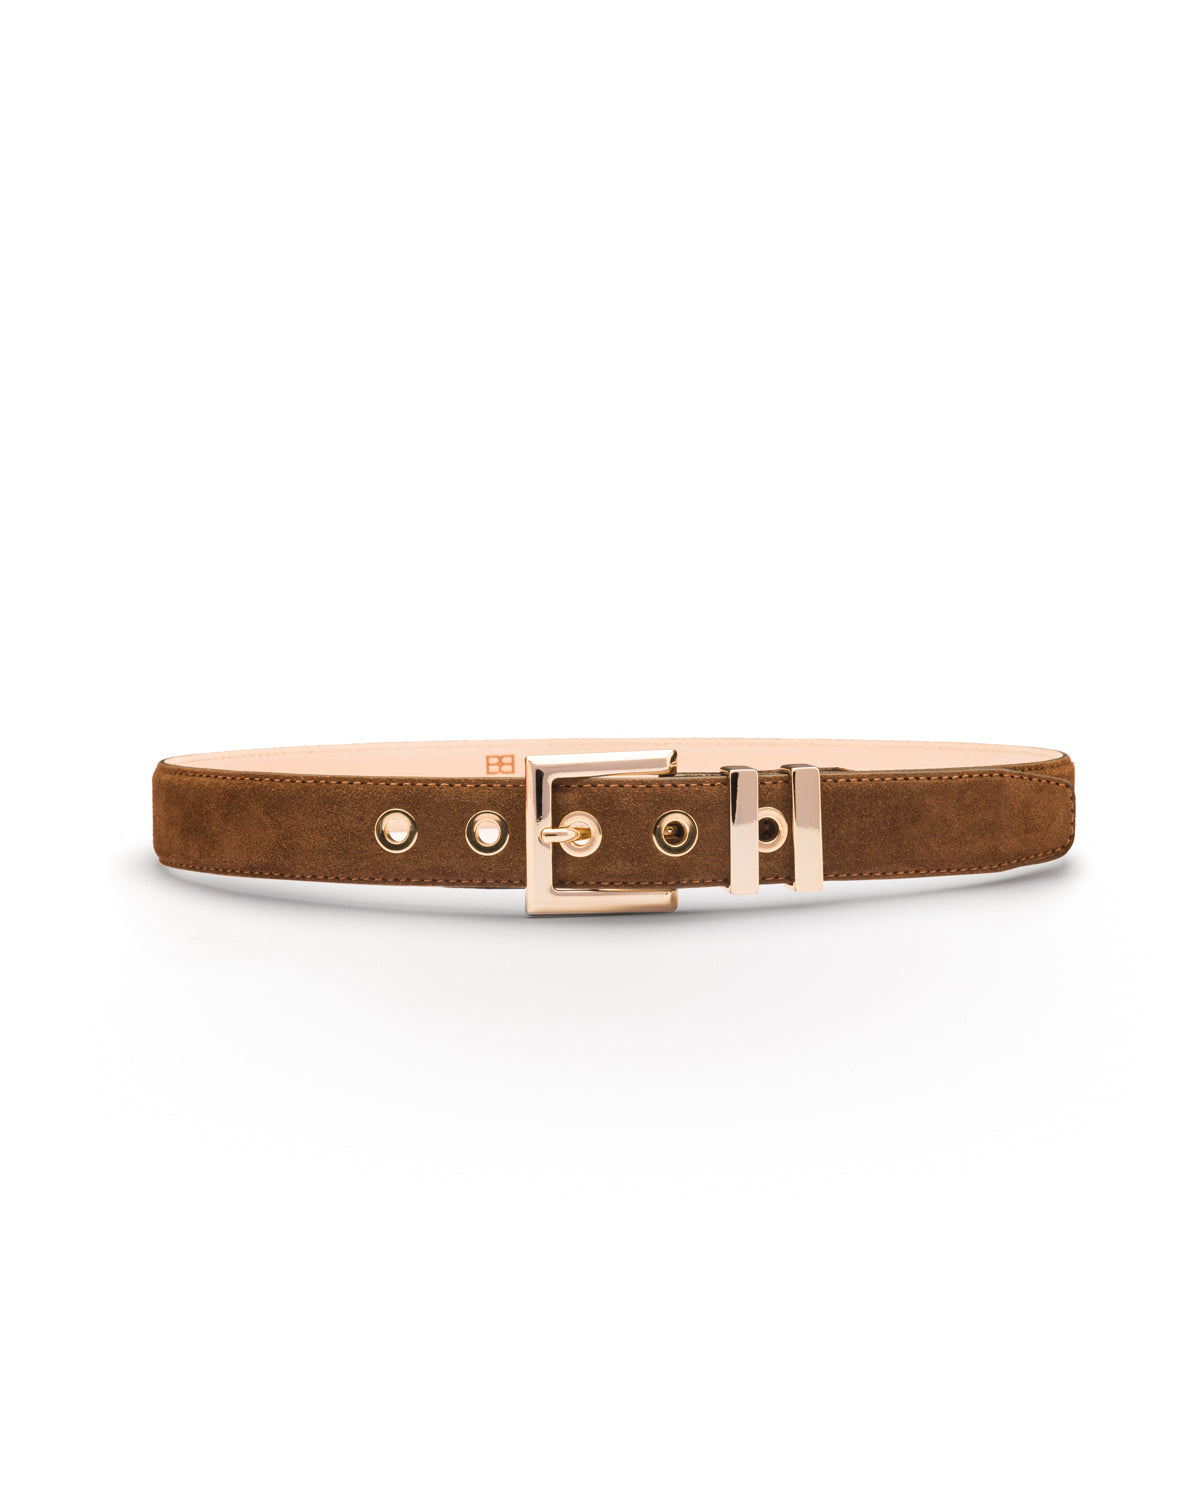 brown suede belt with gold buckle and eyelets